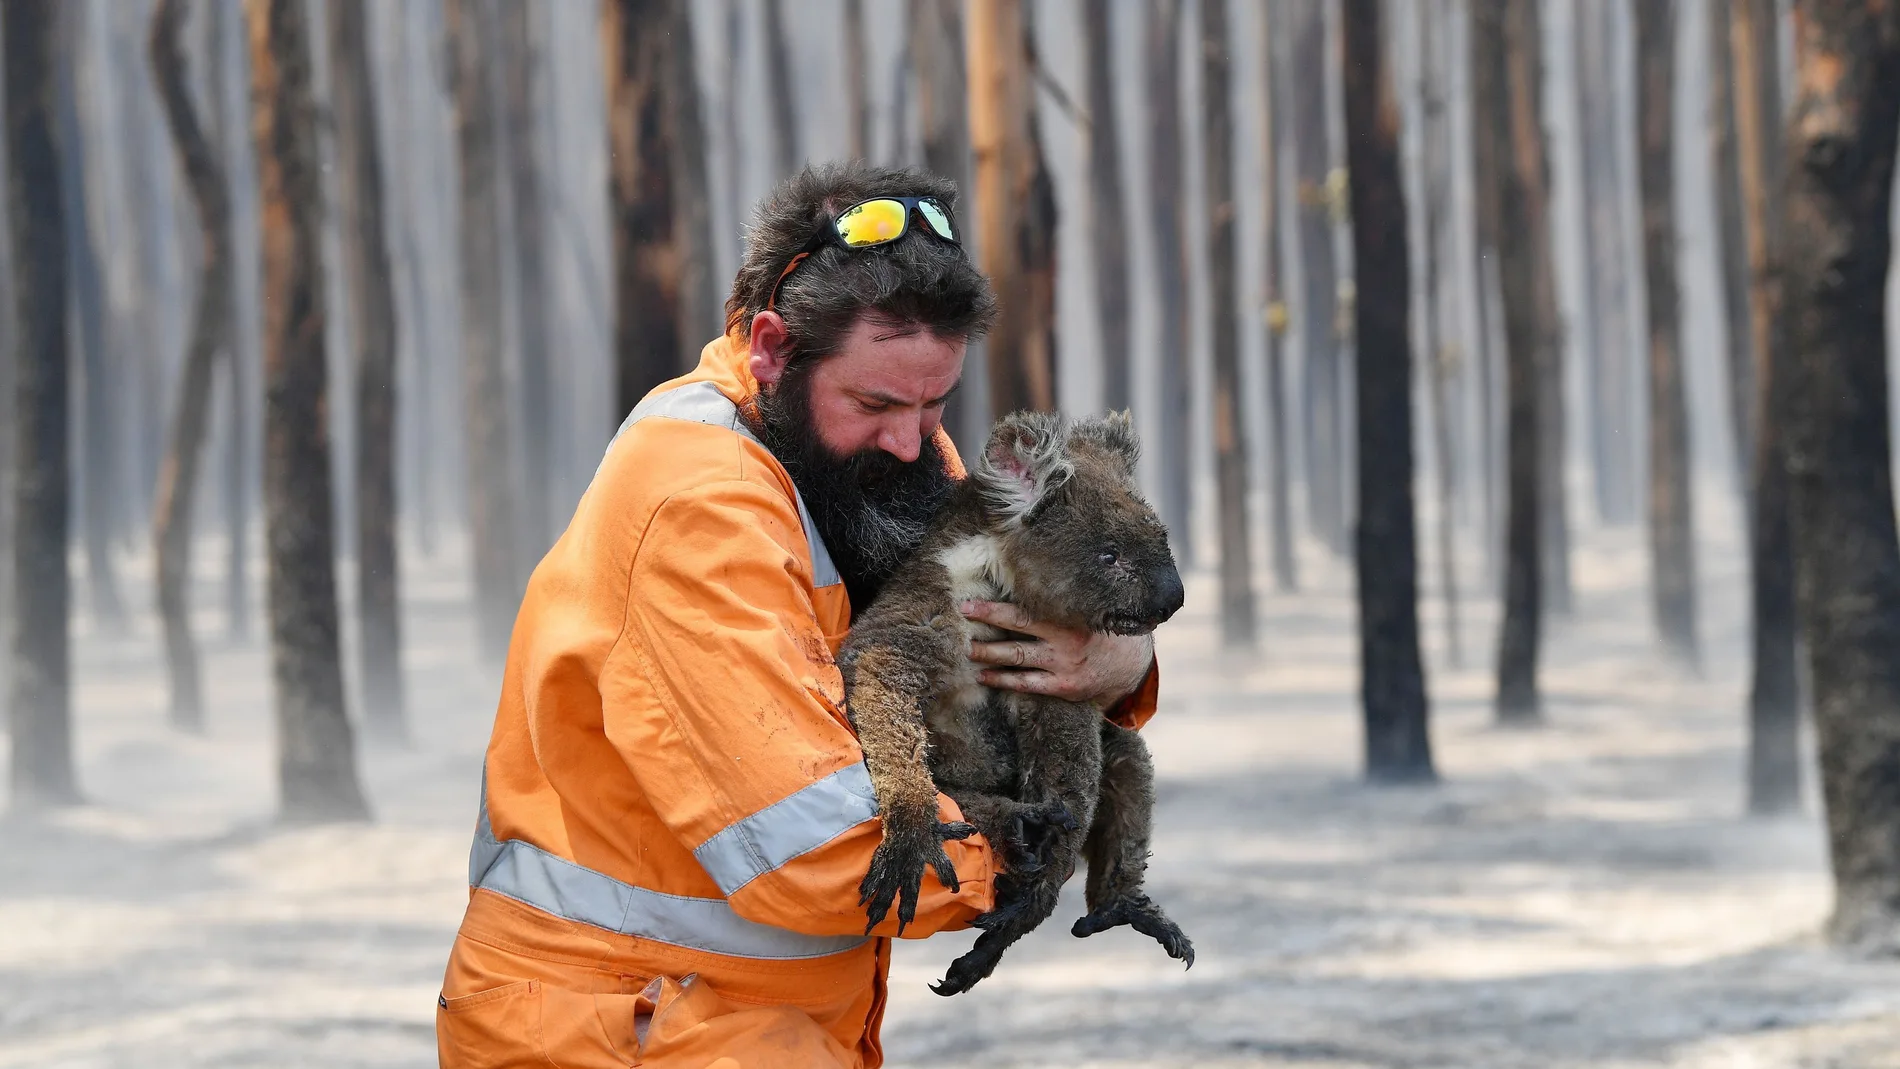 Adelaide wildlife rescuer Simon Adamczyk is seen with a koala rescued at a burning forest near Cape Borda on Kangaroo Island, southwest of Adelaide, Australia, January 7, 2020. AAP Image/David Mariuz/via REUTERS ATTENTION EDITORS - THIS IMAGE WAS PROVIDED BY A THIRD PARTY. NO RESALES. NO ARCHIVE. AUSTRALIA OUT. NEW ZEALAND OUT. TPX IMAGES OF THE DAY